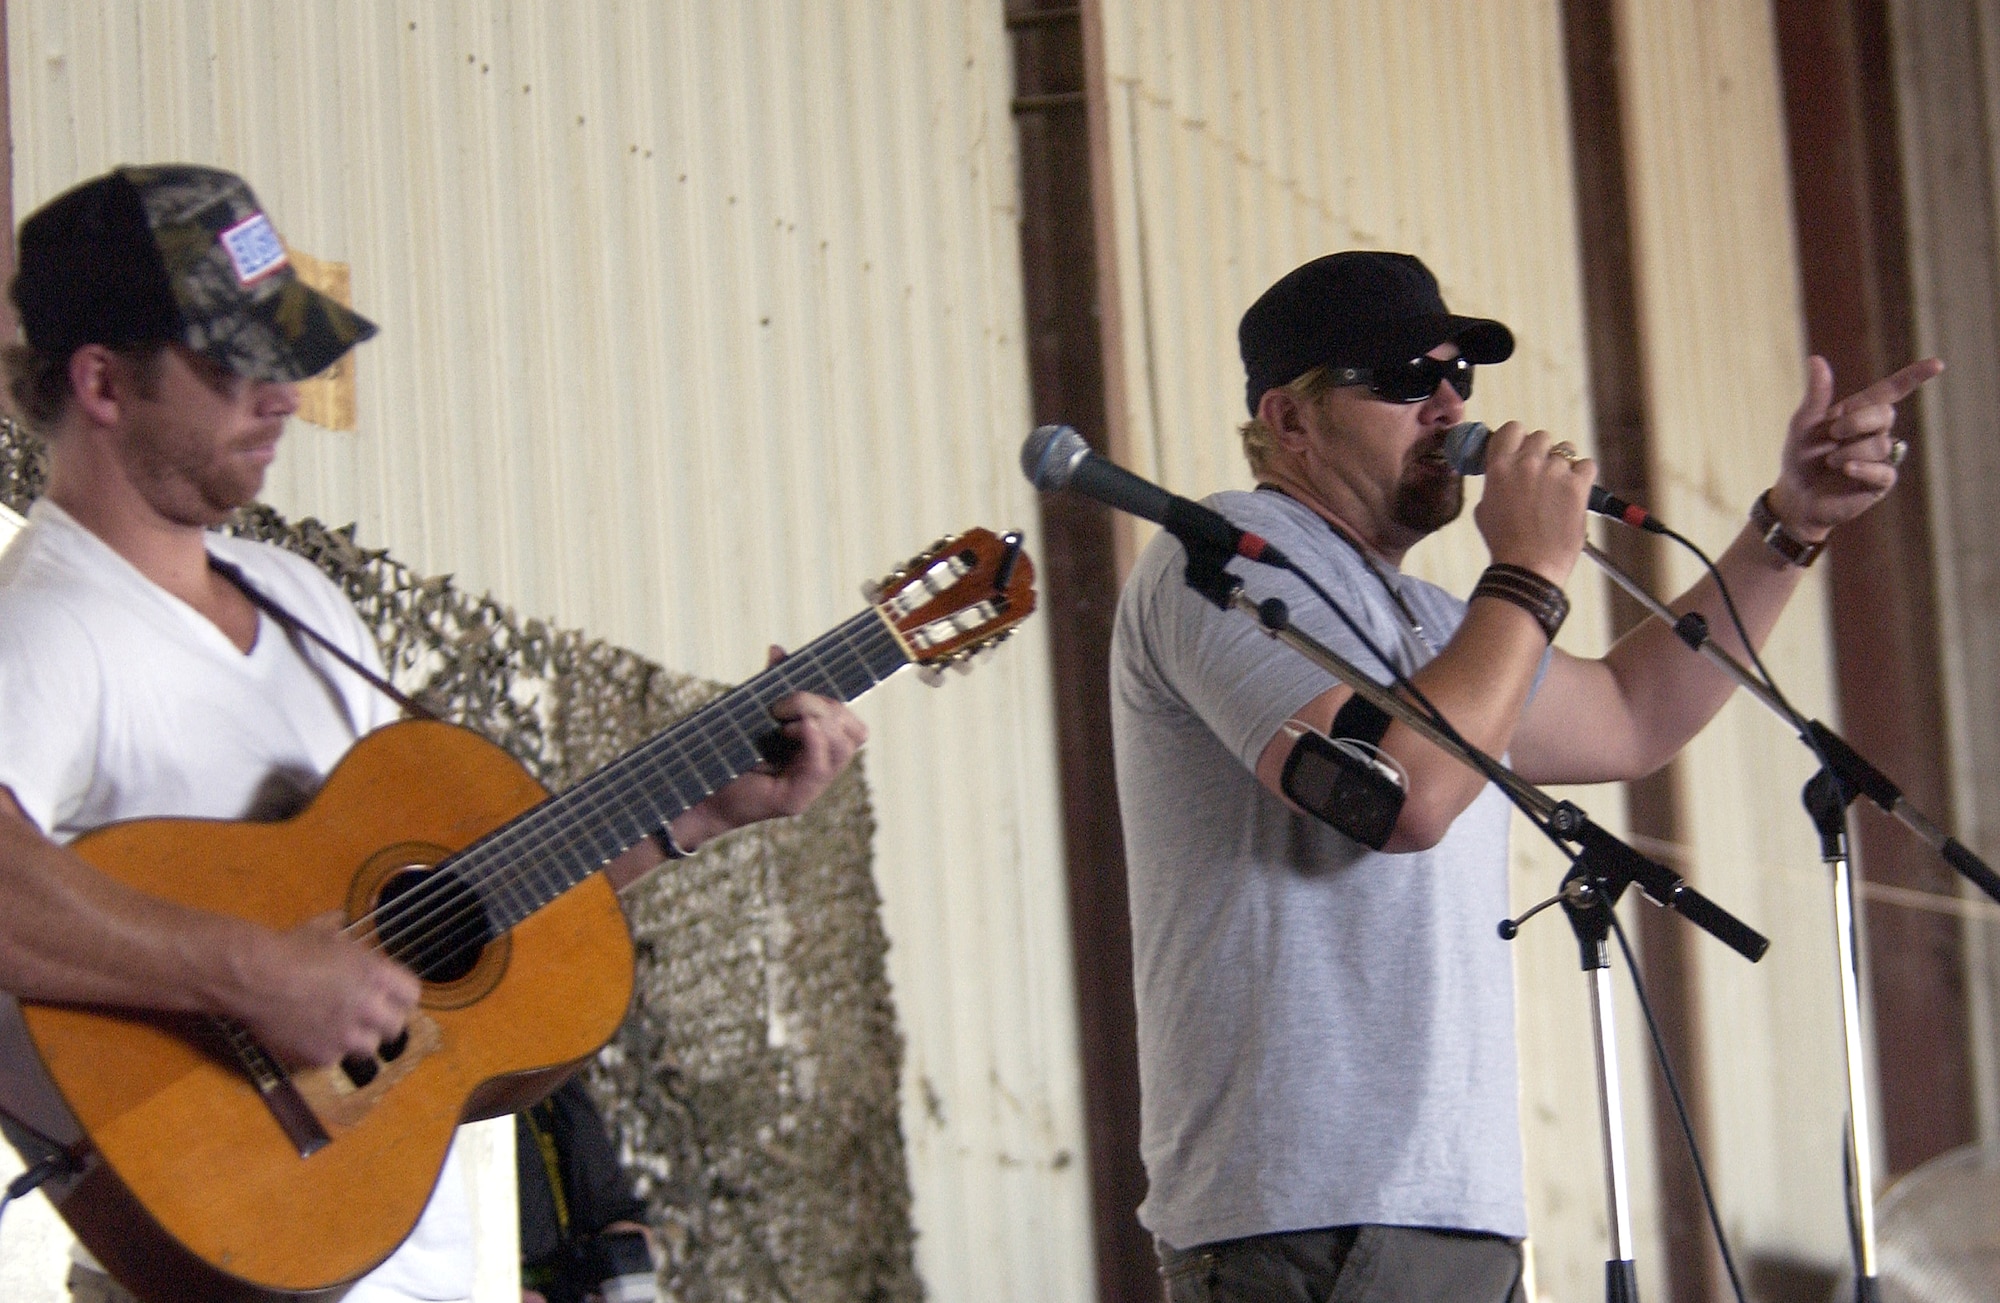 Country music performer Toby Keith and his songwriter Scotty Emerick perform for servicemembers at Forward Operating Base Warhorse, Iraq, on Saturday, May 27, 2006. The base in the Diyala Province was the first stop on Mr. Keith's USO tour. (U.S. Air Force photo/Tech. Sgt. Ken Bergmann)